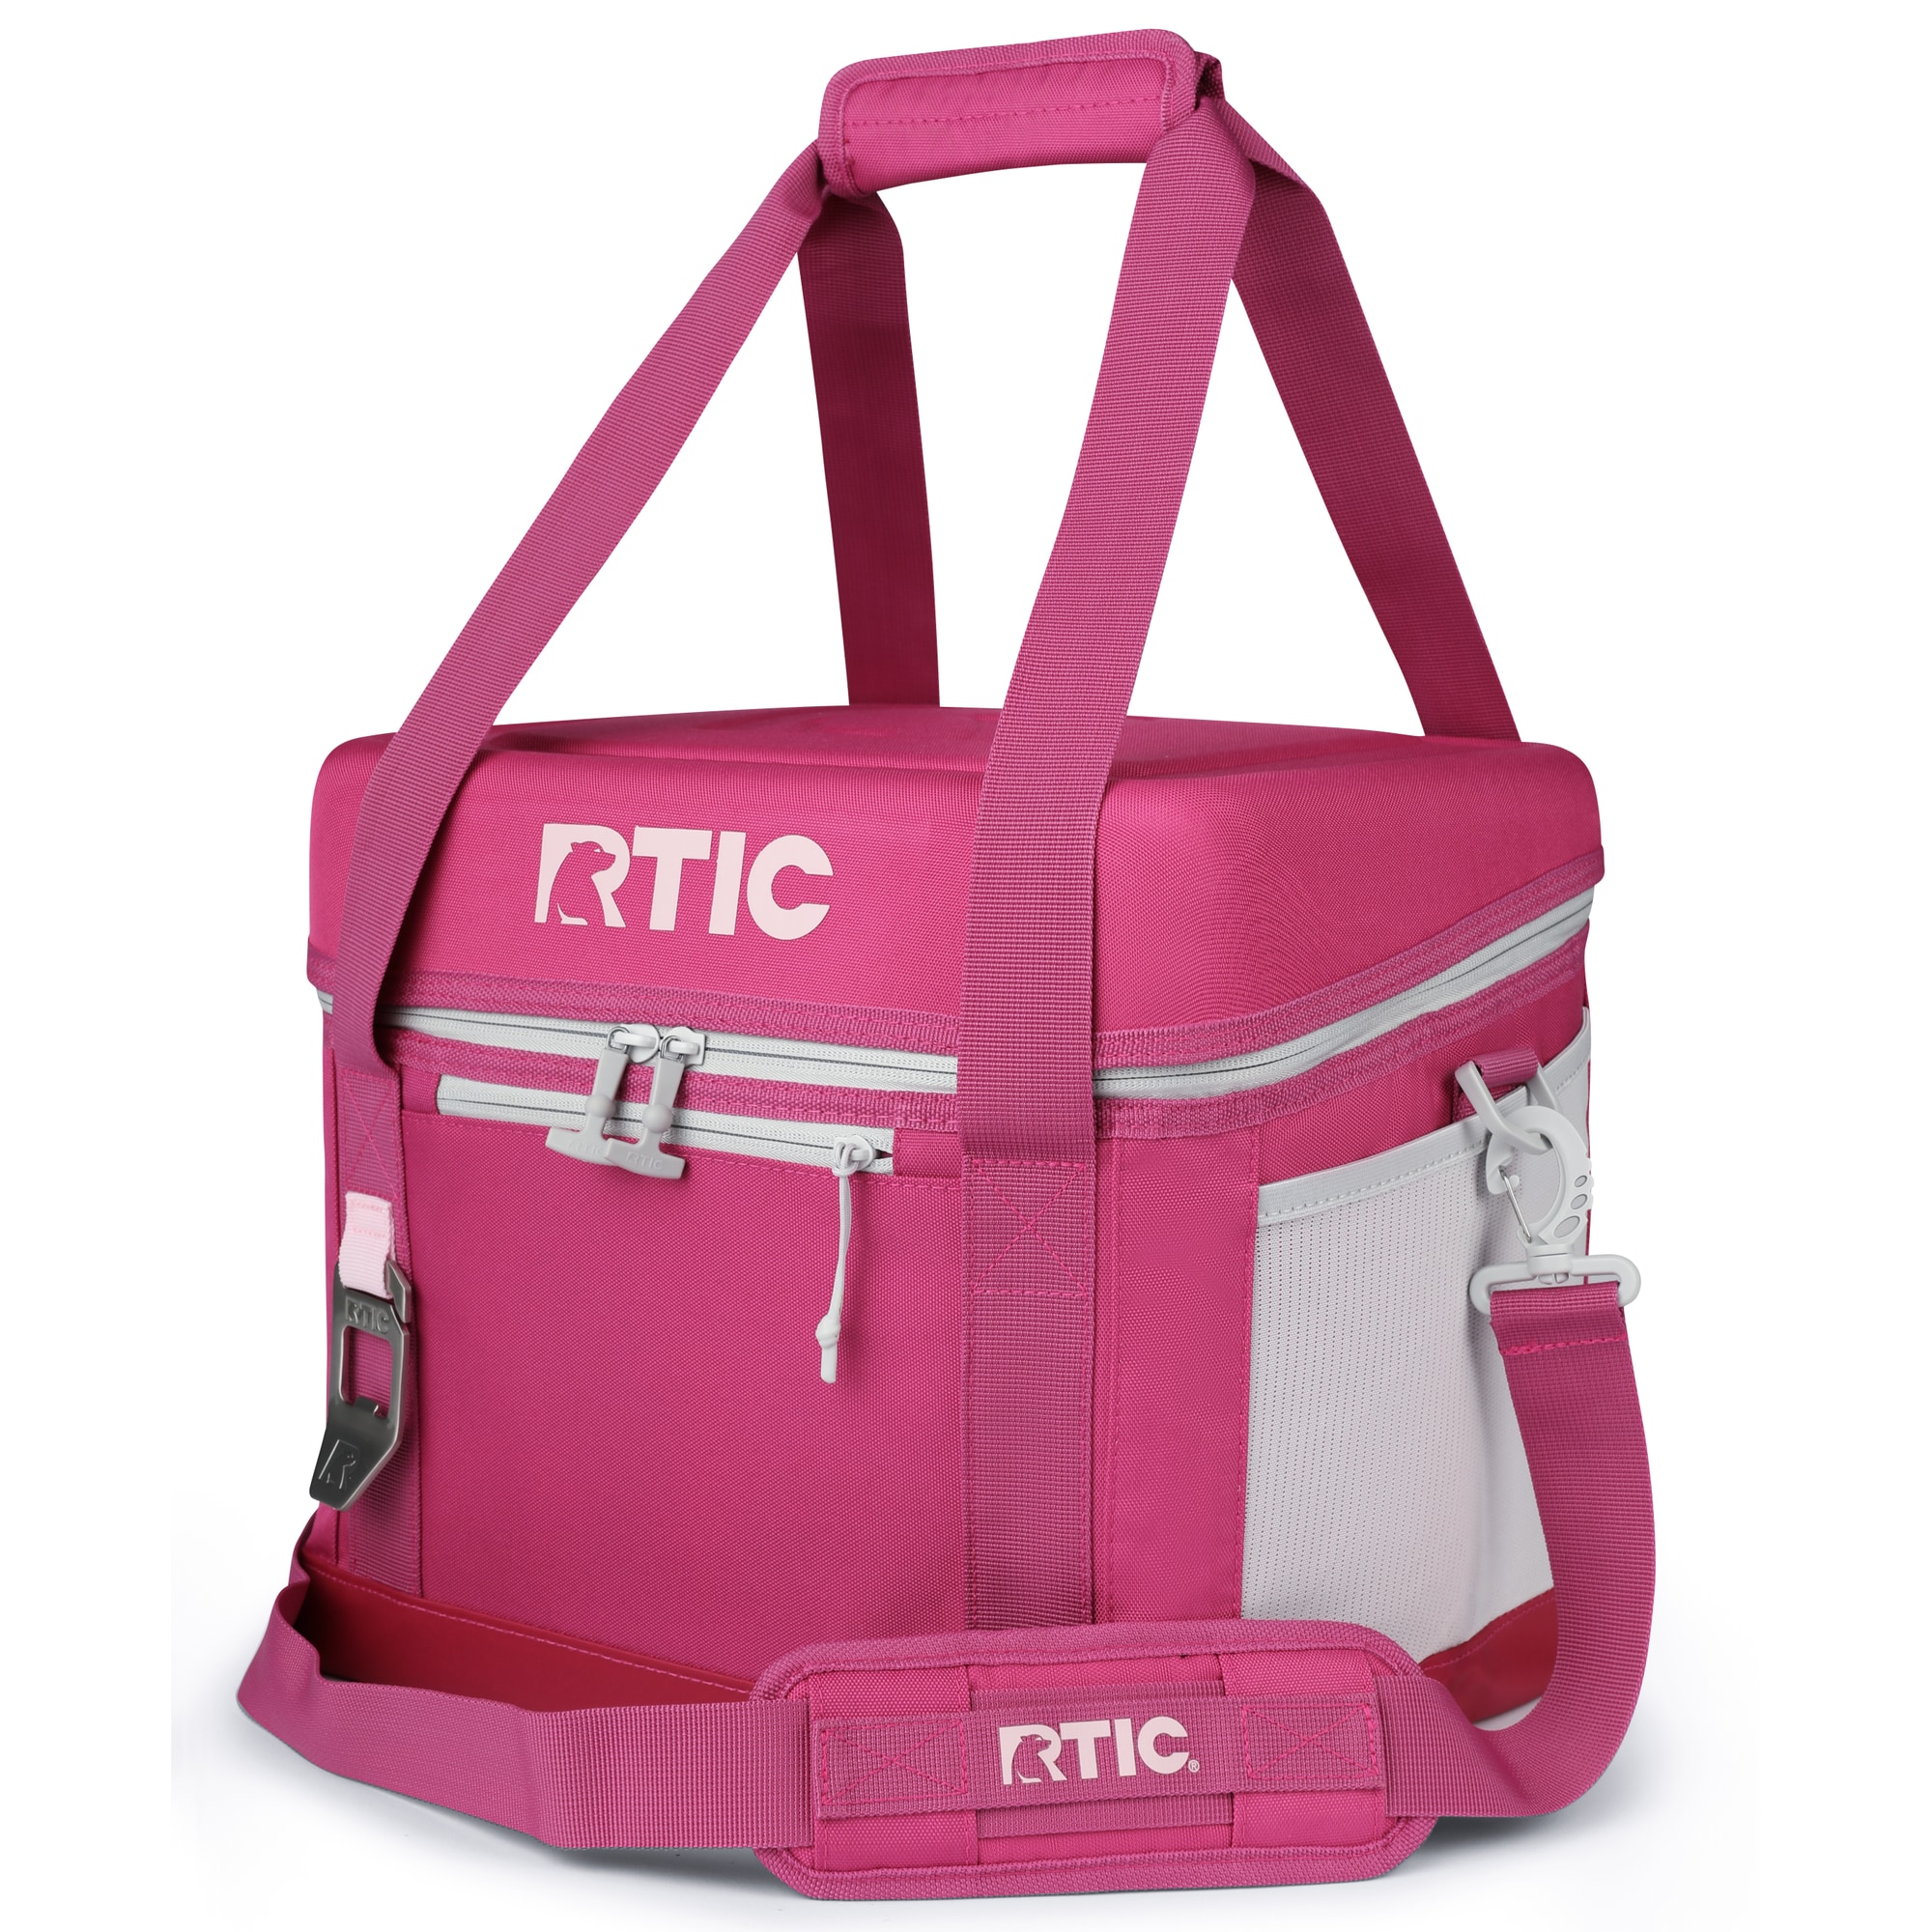 RTIC Outdoors: Overbuilt. Not overpriced. Hard Coolers, Soft Coolers,  Insulated Drinkware, Bags, and Custom Shop